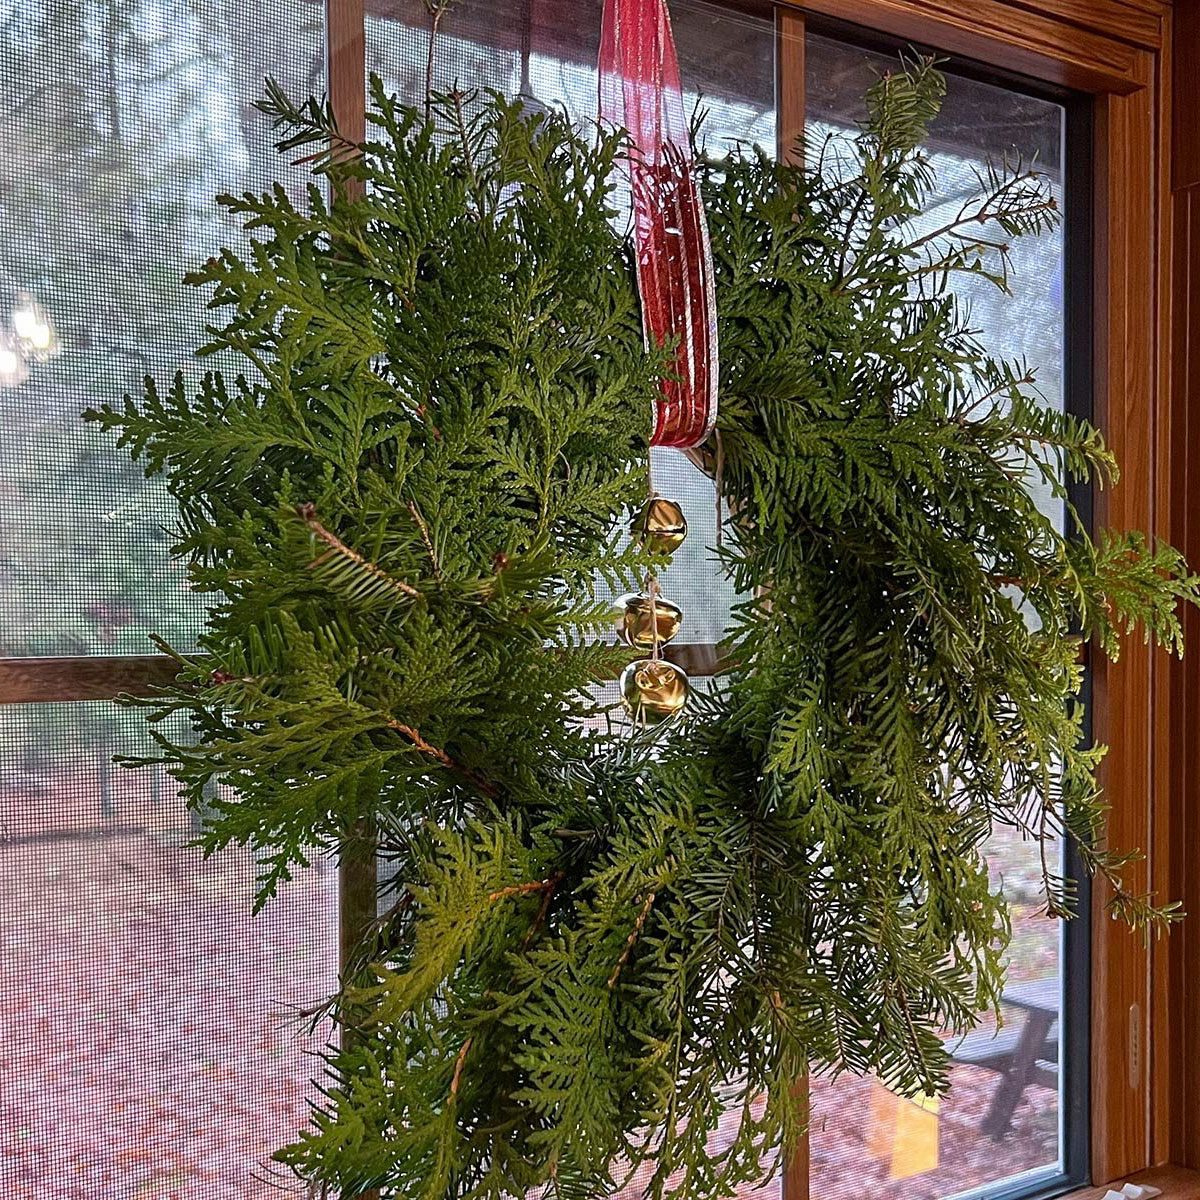 Wreath with bells hanging on a window